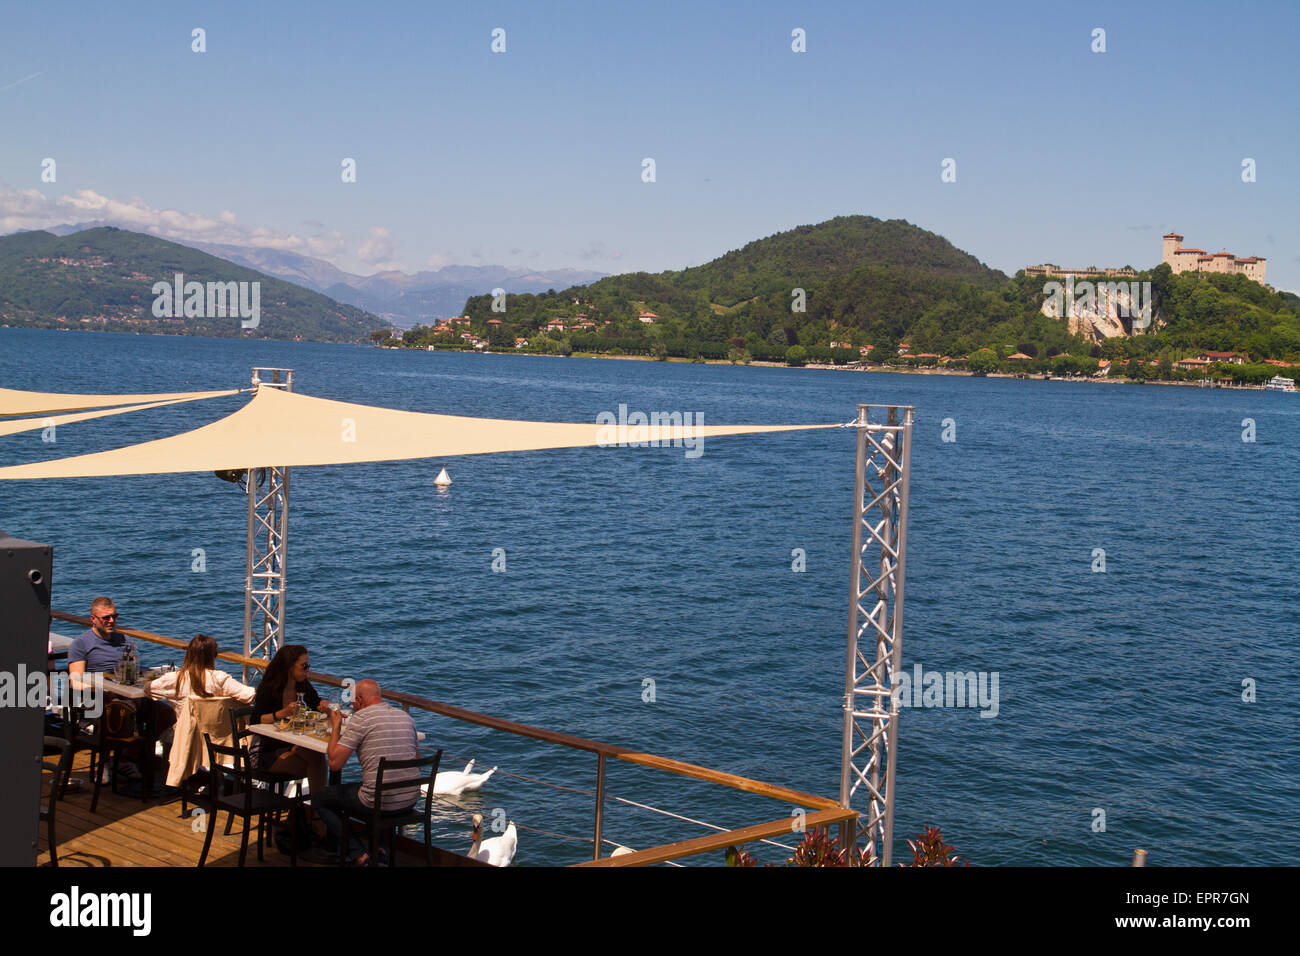 tourists eating at a lakeside restaurant in Arona, Lake Maggiore, Italy Stock Photo